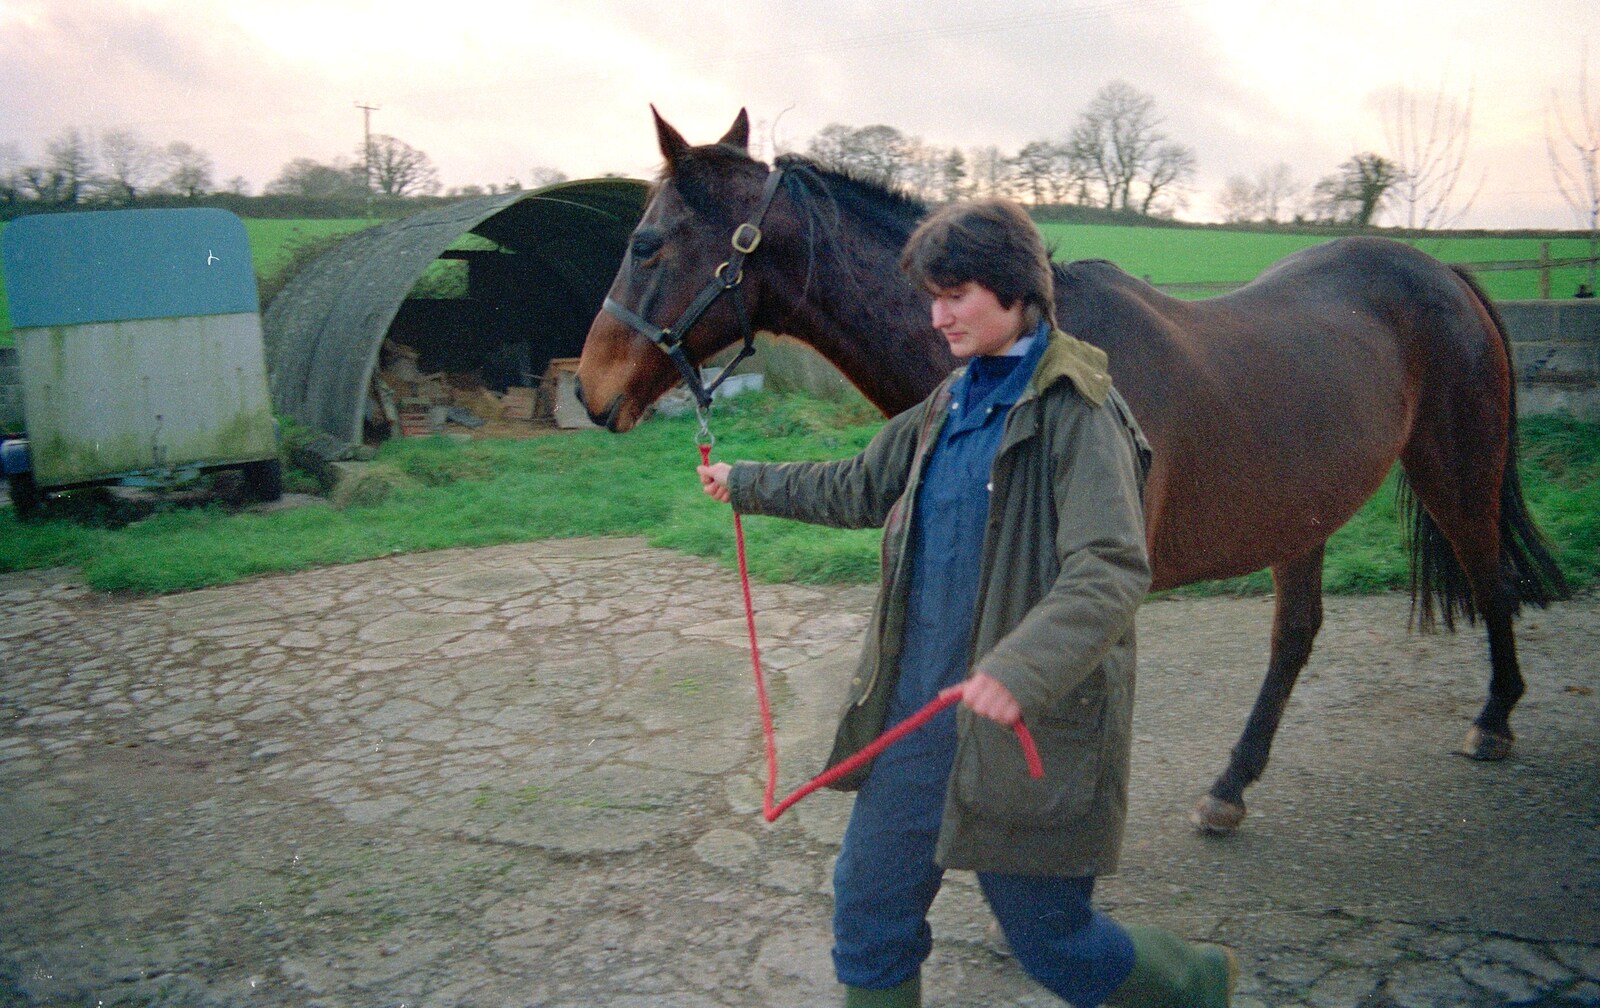 Angela takes Oberon out for a stroll from Uni: A Dinner Party, Harbertonford and Buckfastleigh, Devon - 24th December 1988